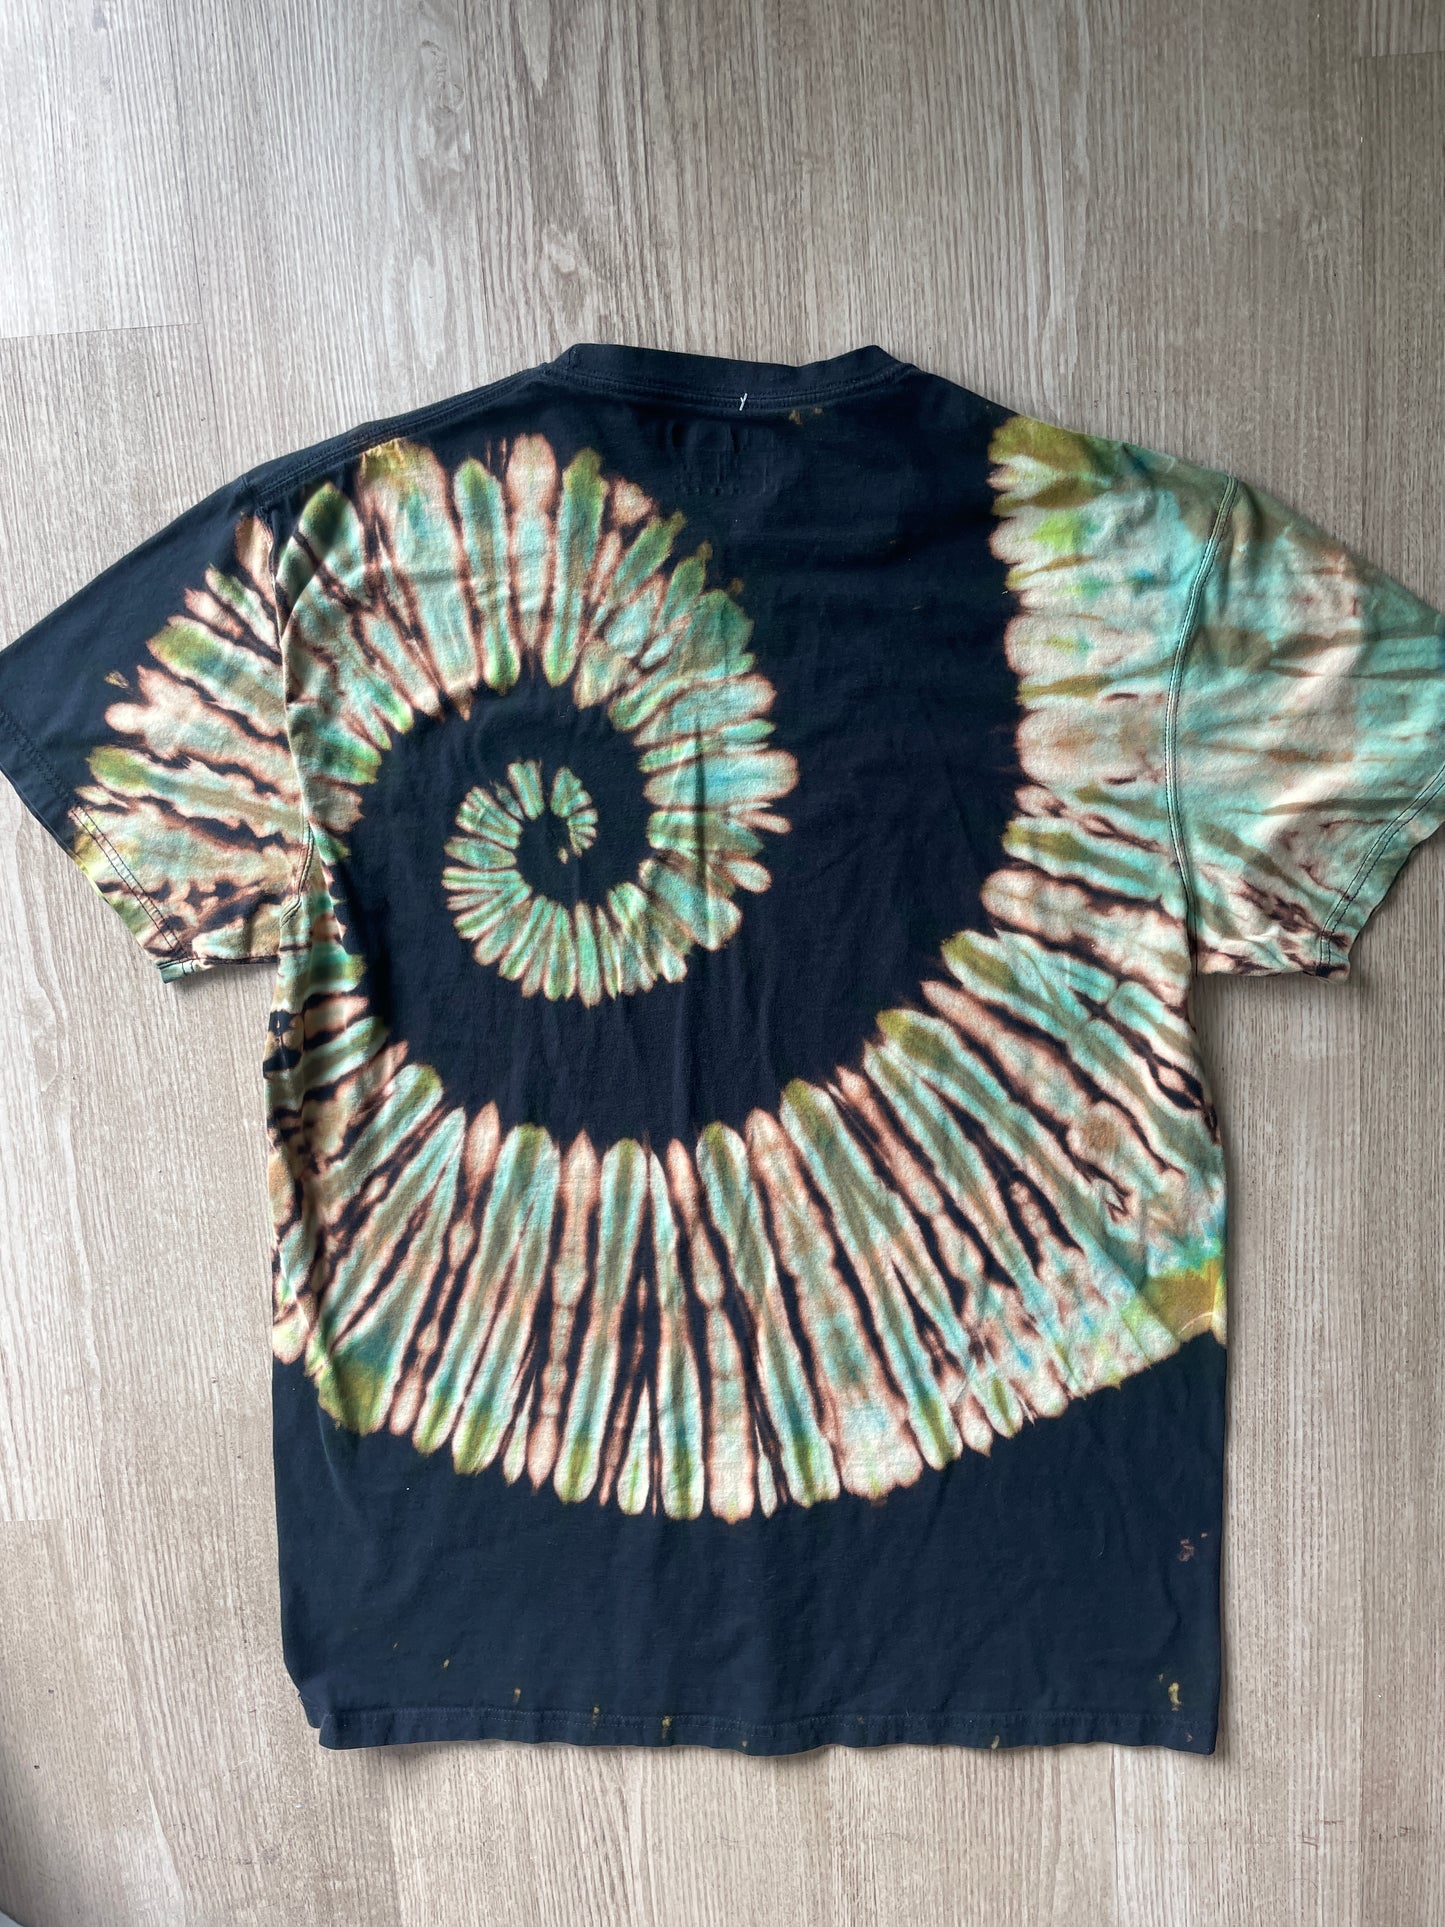 XL Men’s 5.11 Climbing Shoe Handmade Reversed Tie Dyed T-Shirt | One-Of-a-Kind Green and Black Short Sleeve